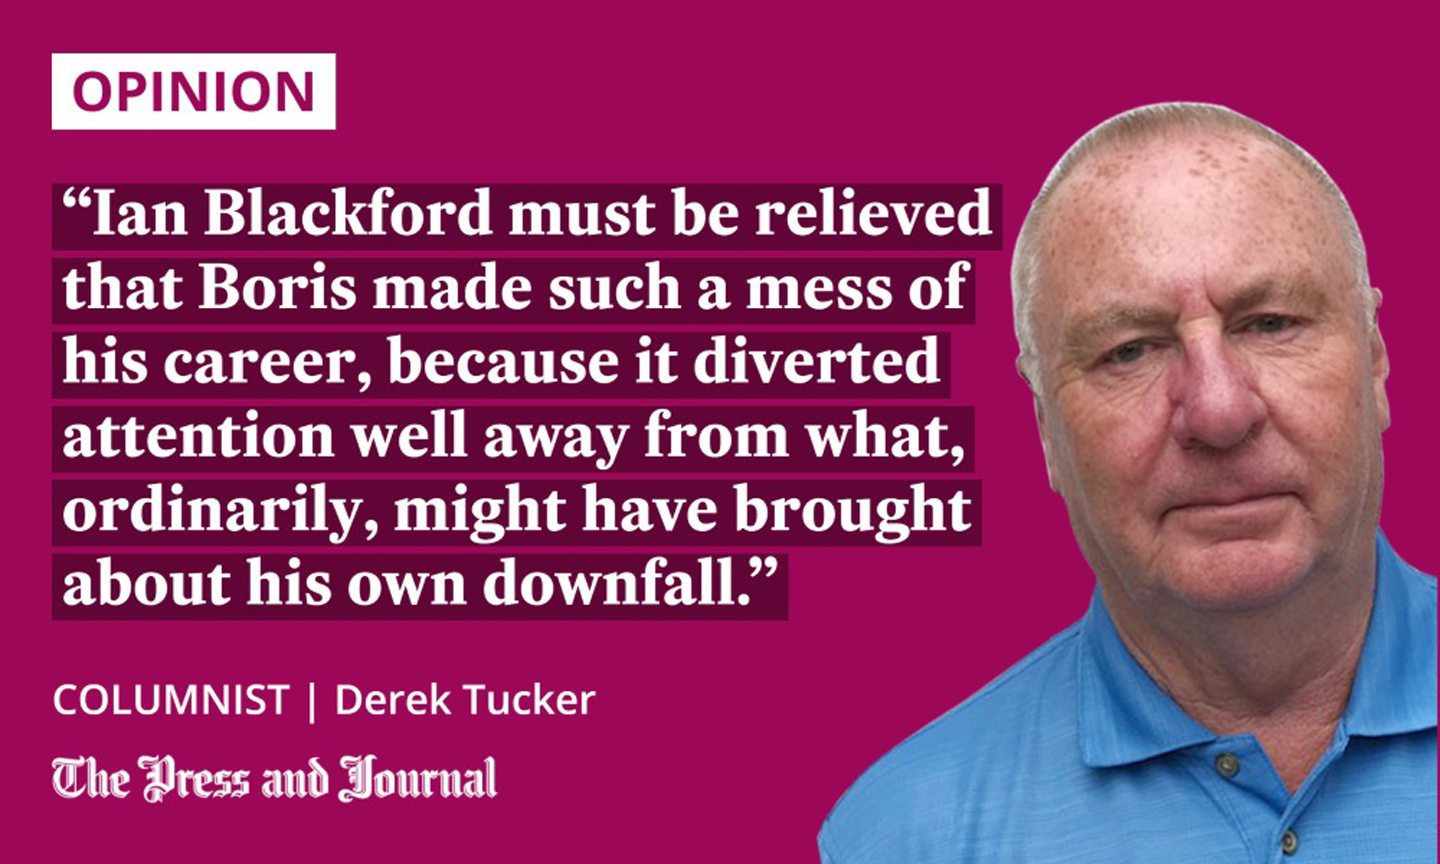 Columnist, Derek Tucker speaks about sexual harassments in the world of UK politics: "Ian Blackford must be relieved that Boris made such a mess of his career, because it diverted attention well away from what, ordinarily, might have brought about his own downfall."